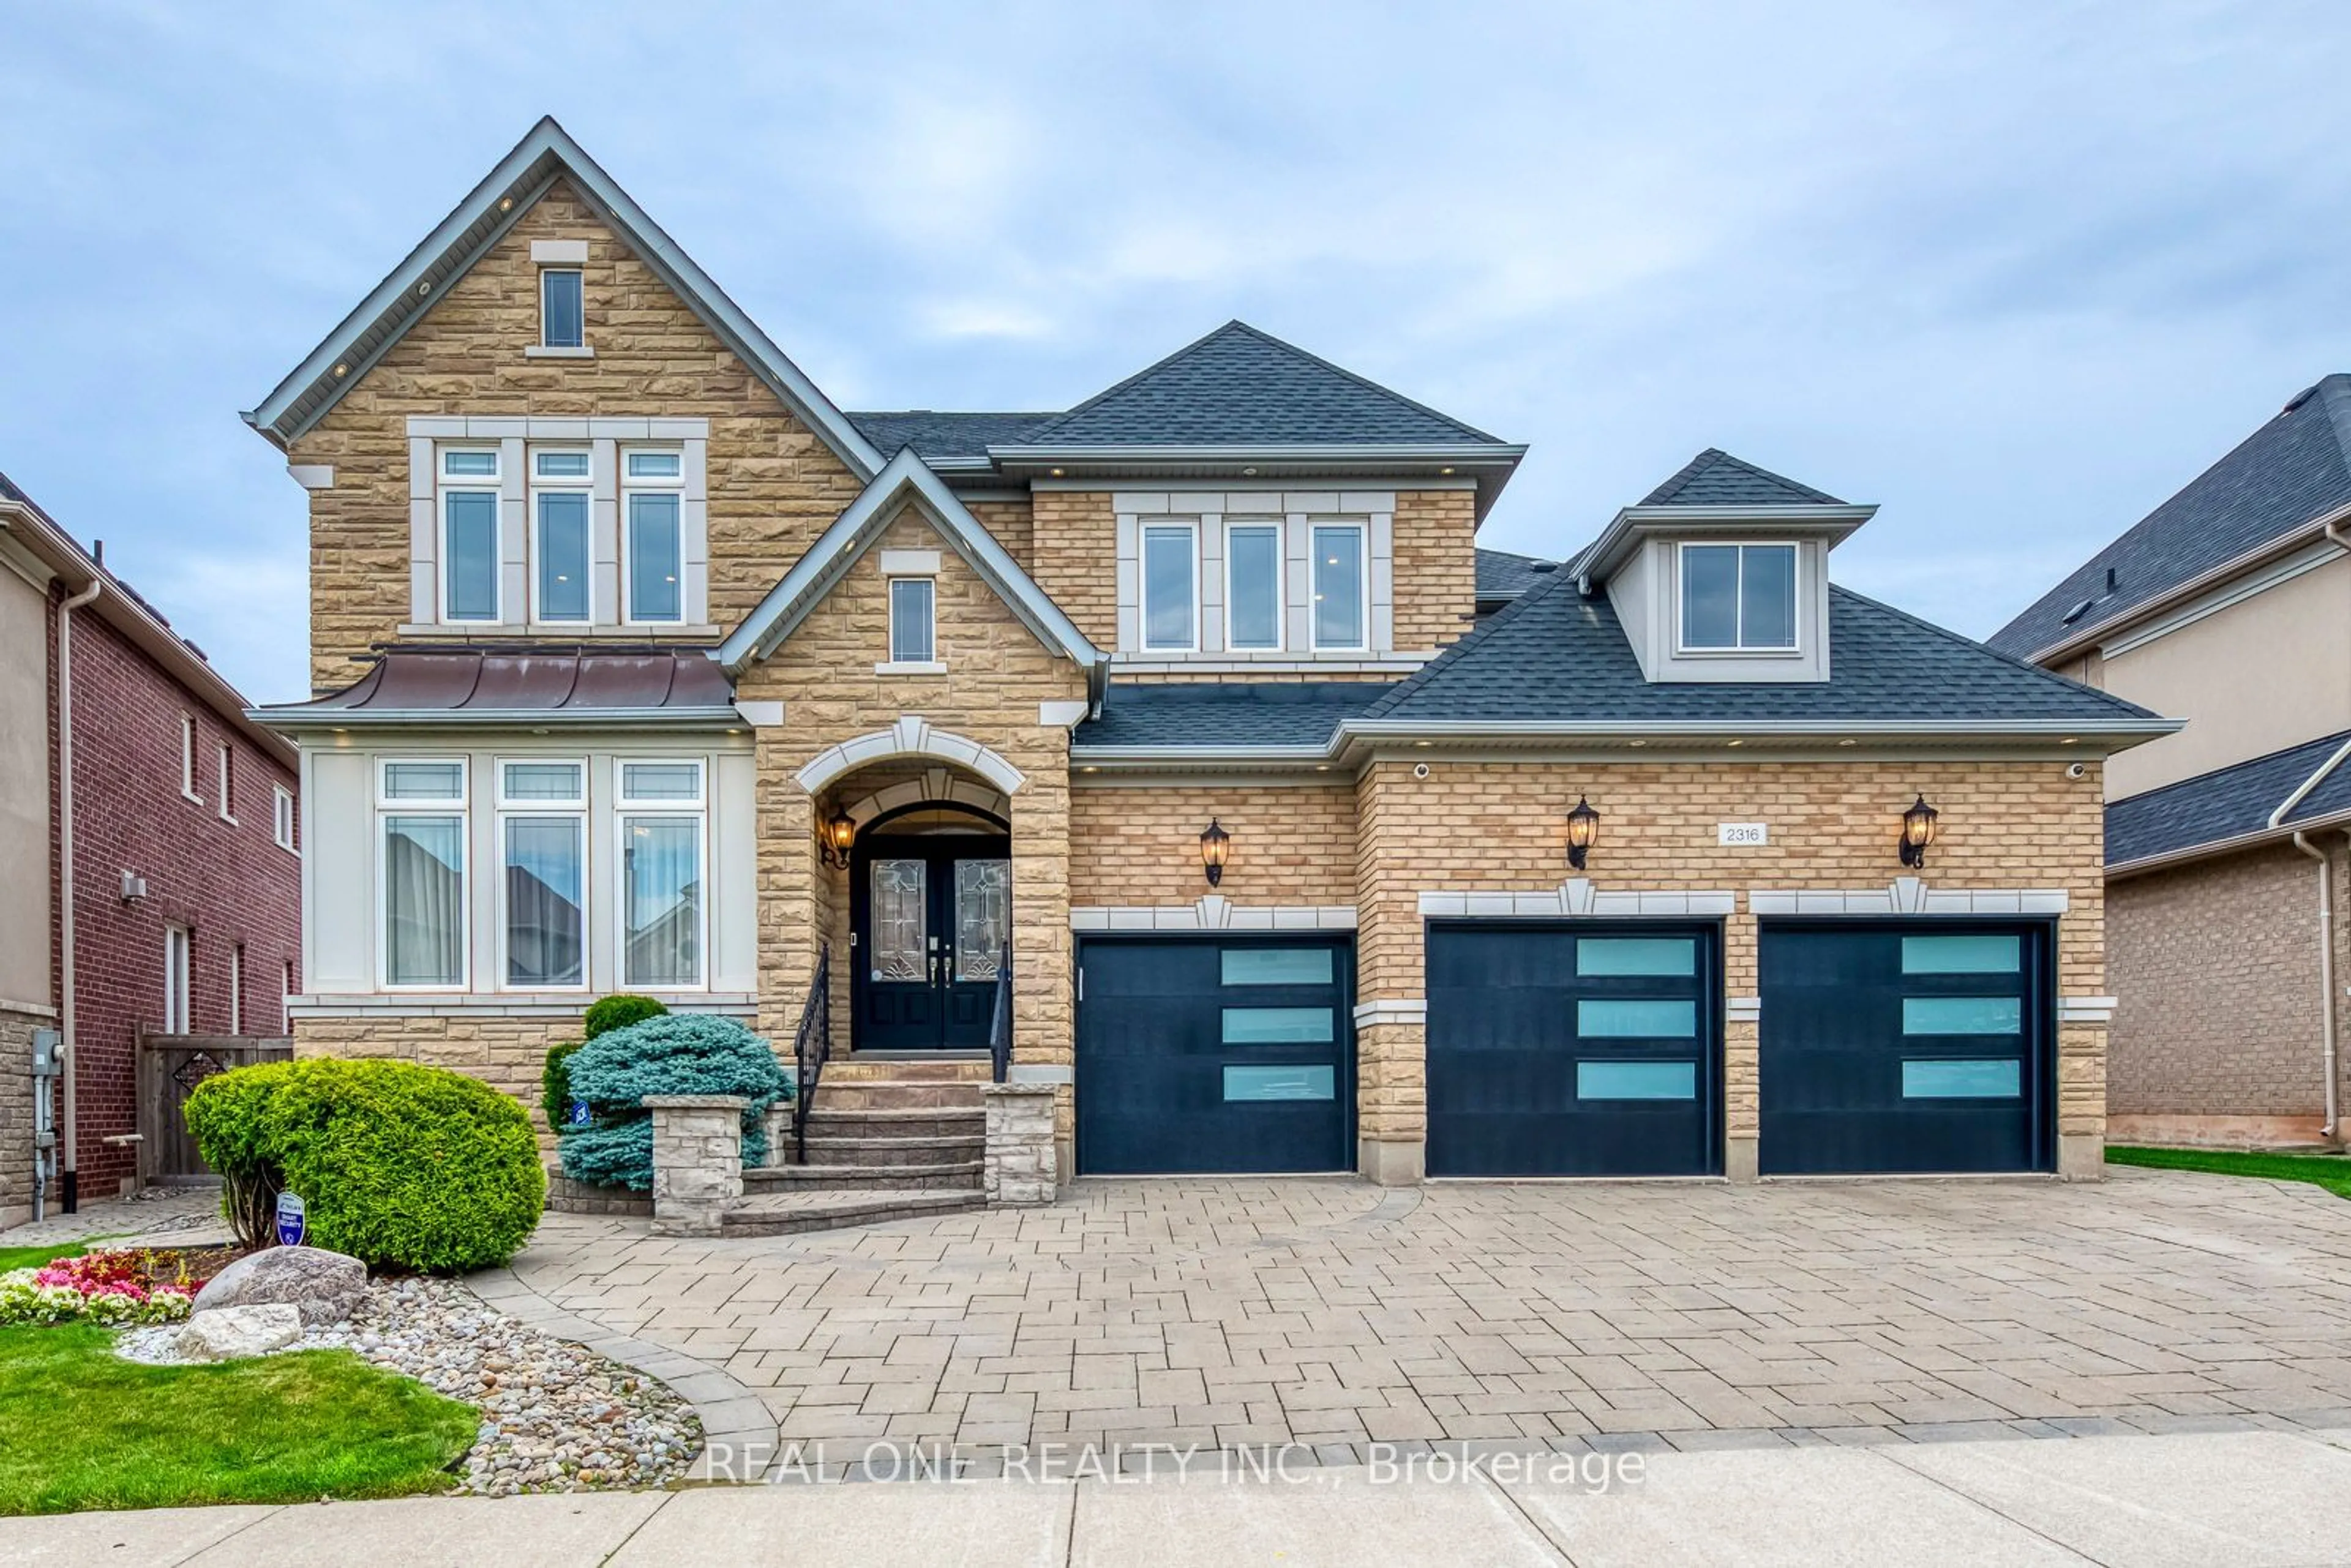 Home with brick exterior material for 2316 Delnice Dr, Oakville Ontario L6H 0A9